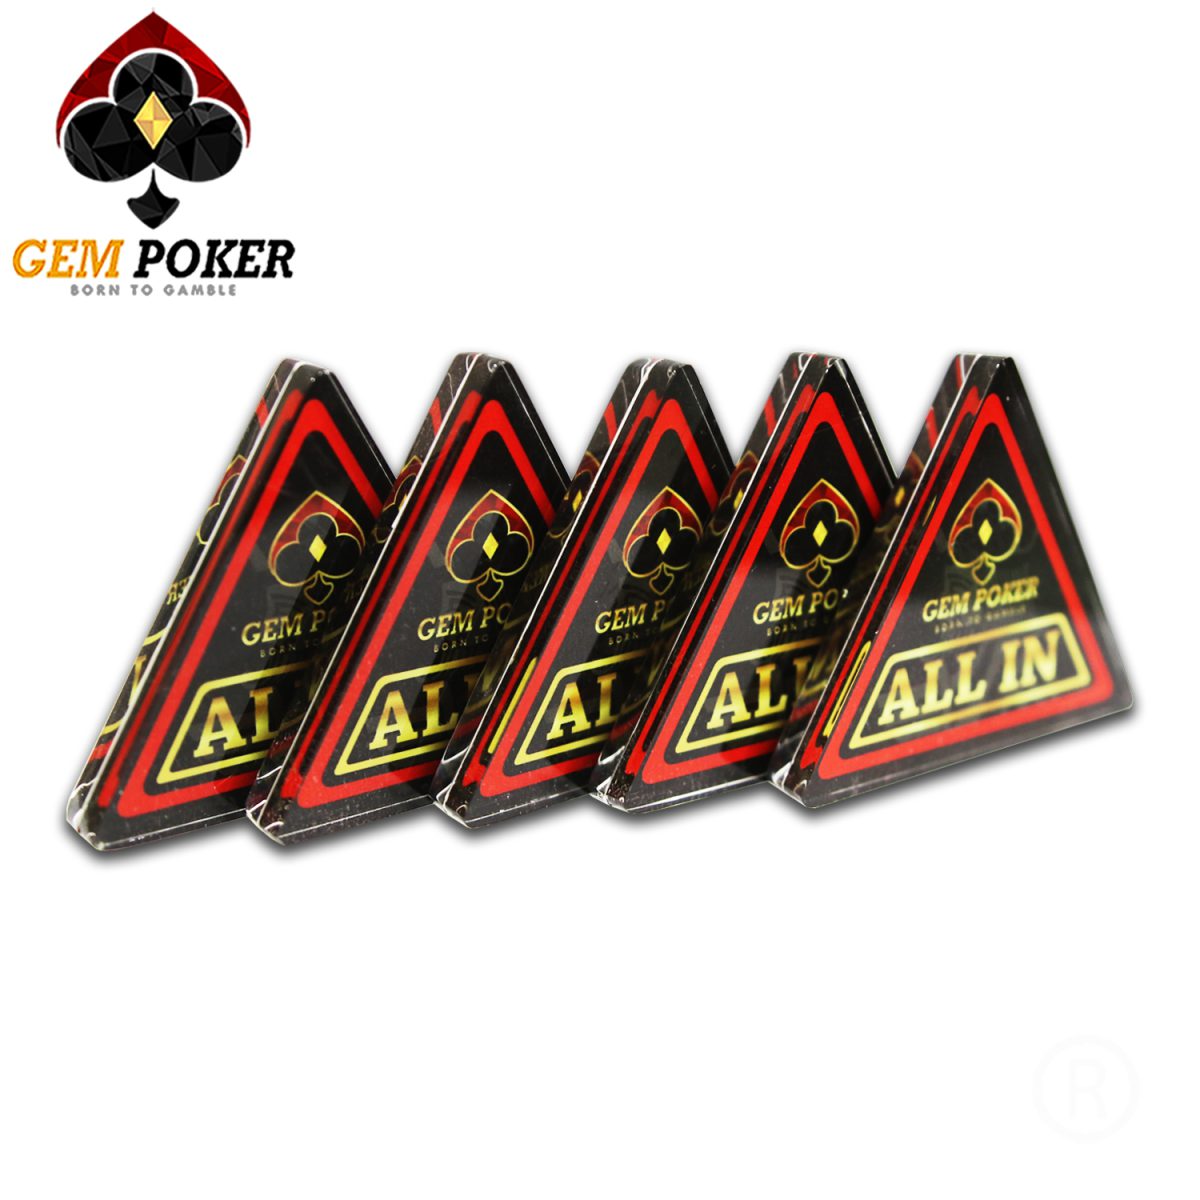 NÚT ALL-IN GEMPOKER ACRYLIC CAO CẤP - 02